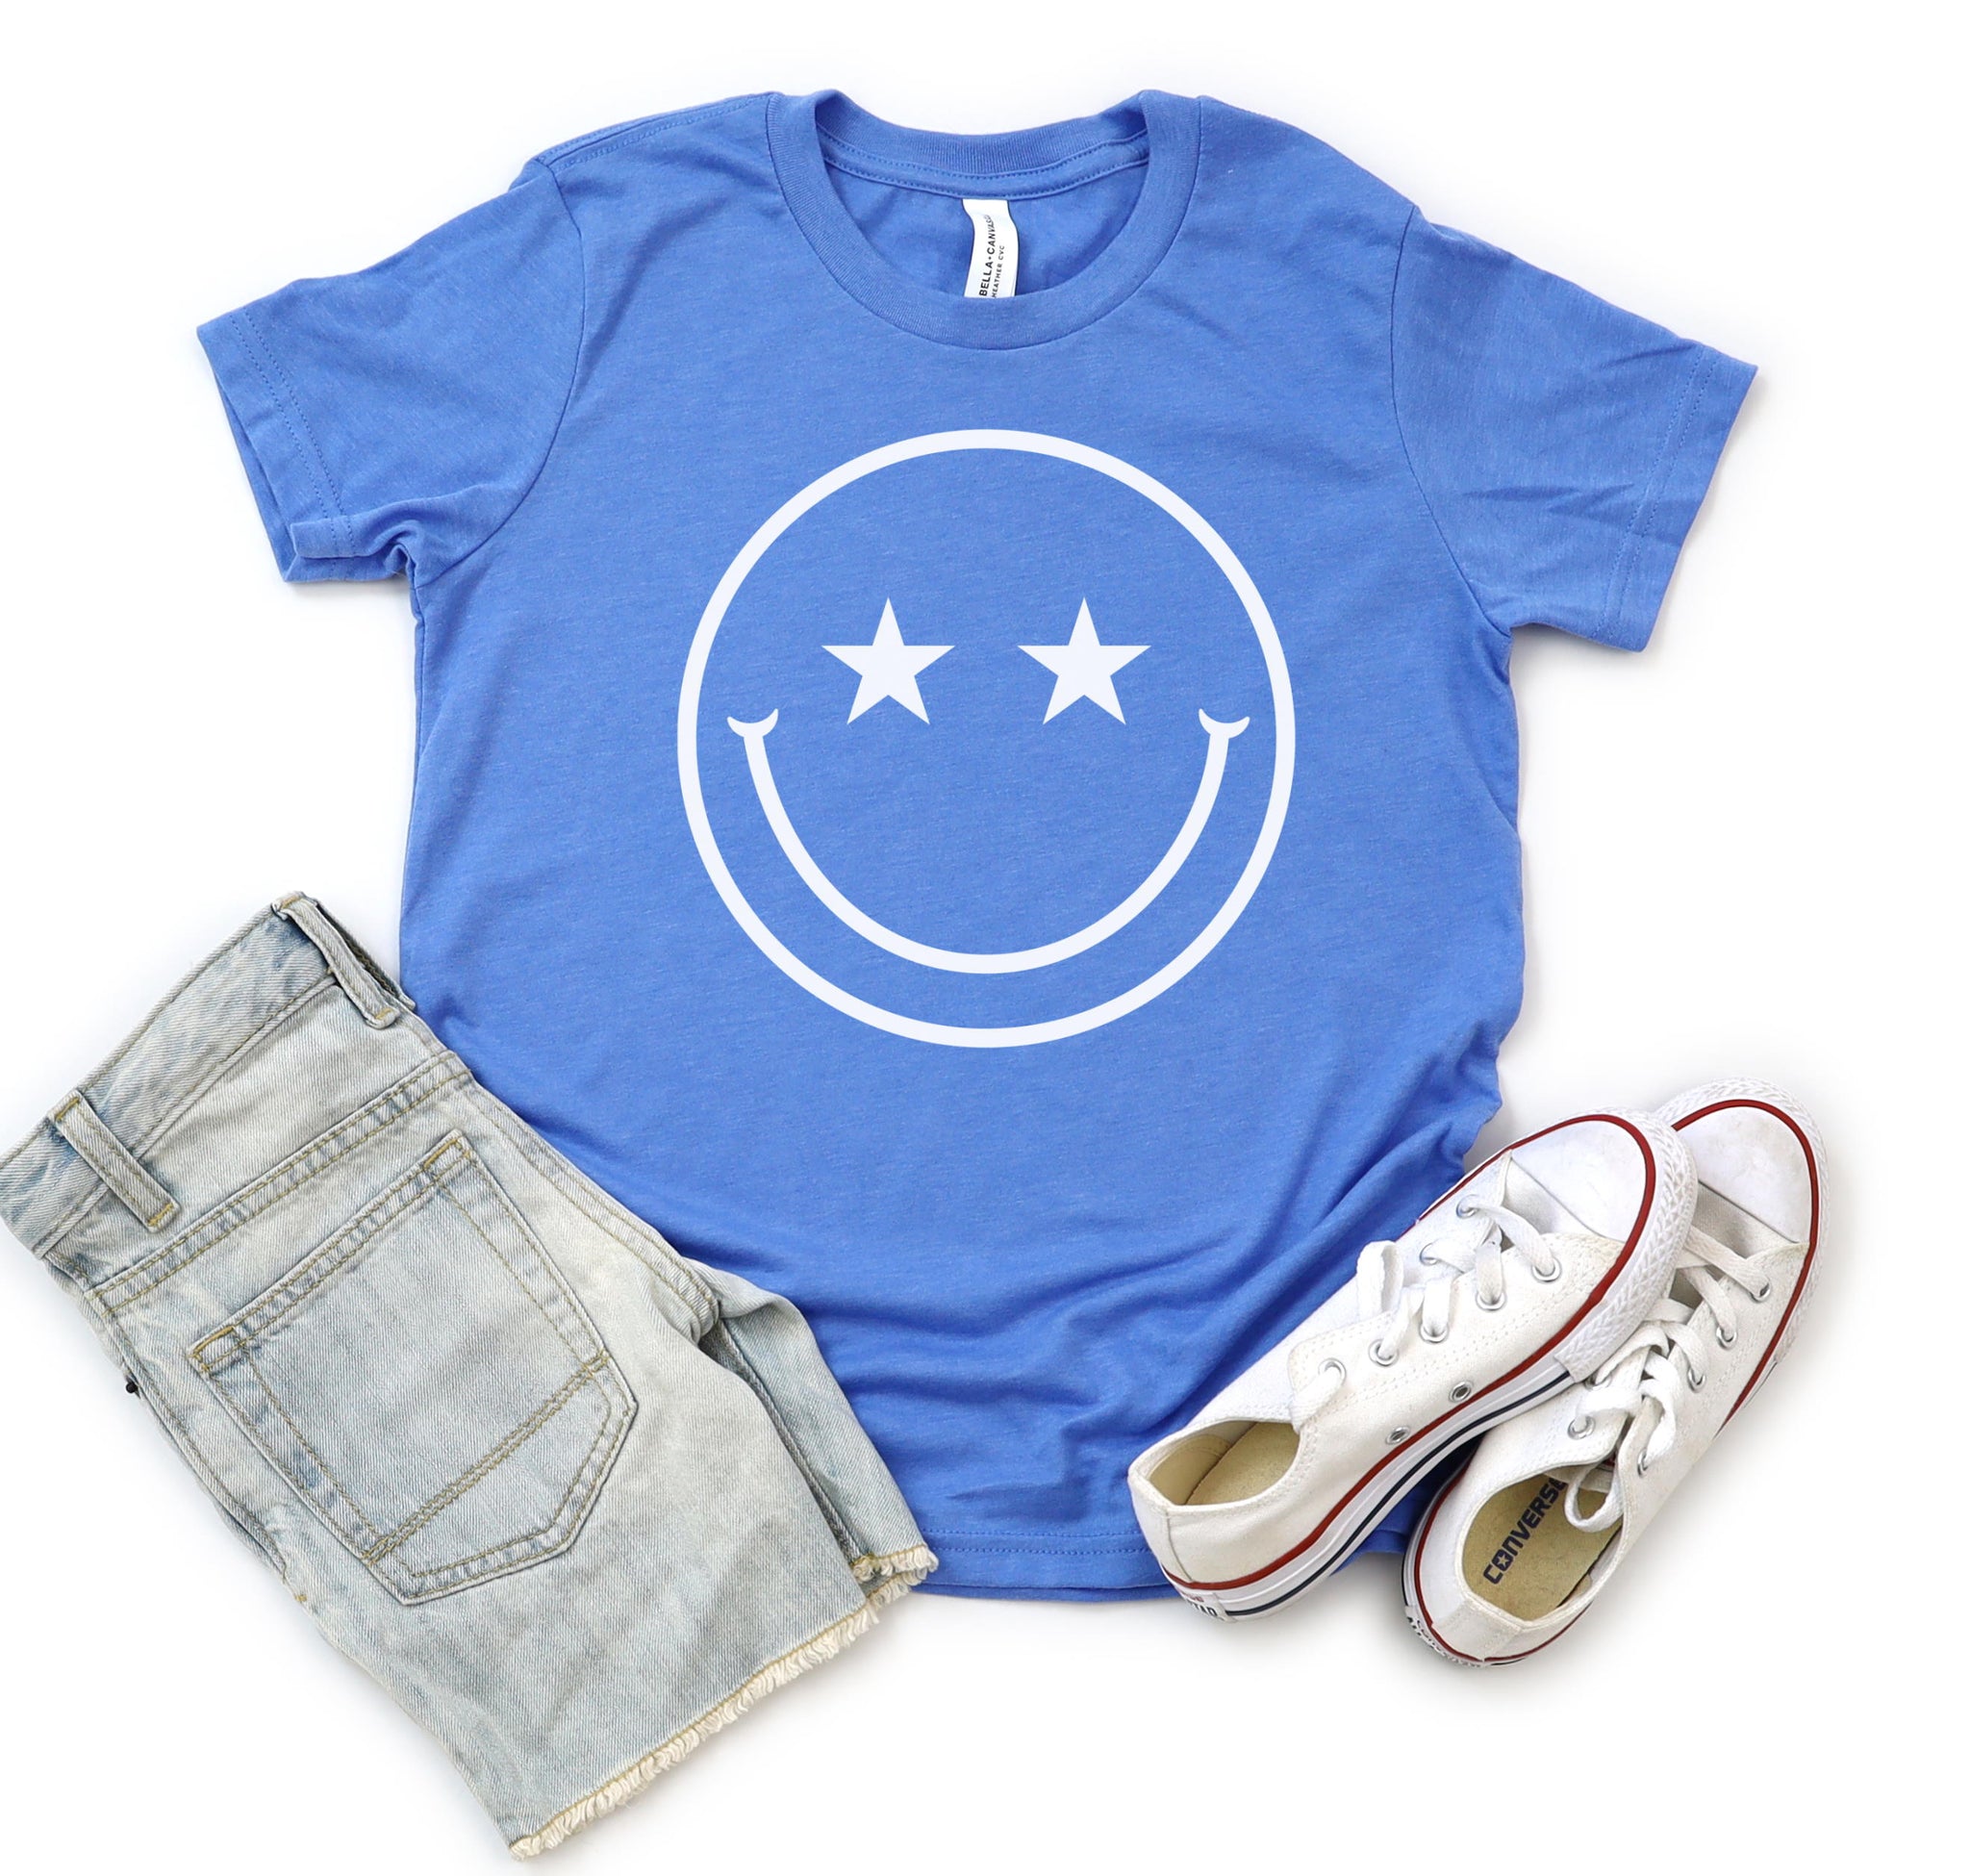 Star Eyes Smiley Face T-Shirt for girls and boys.